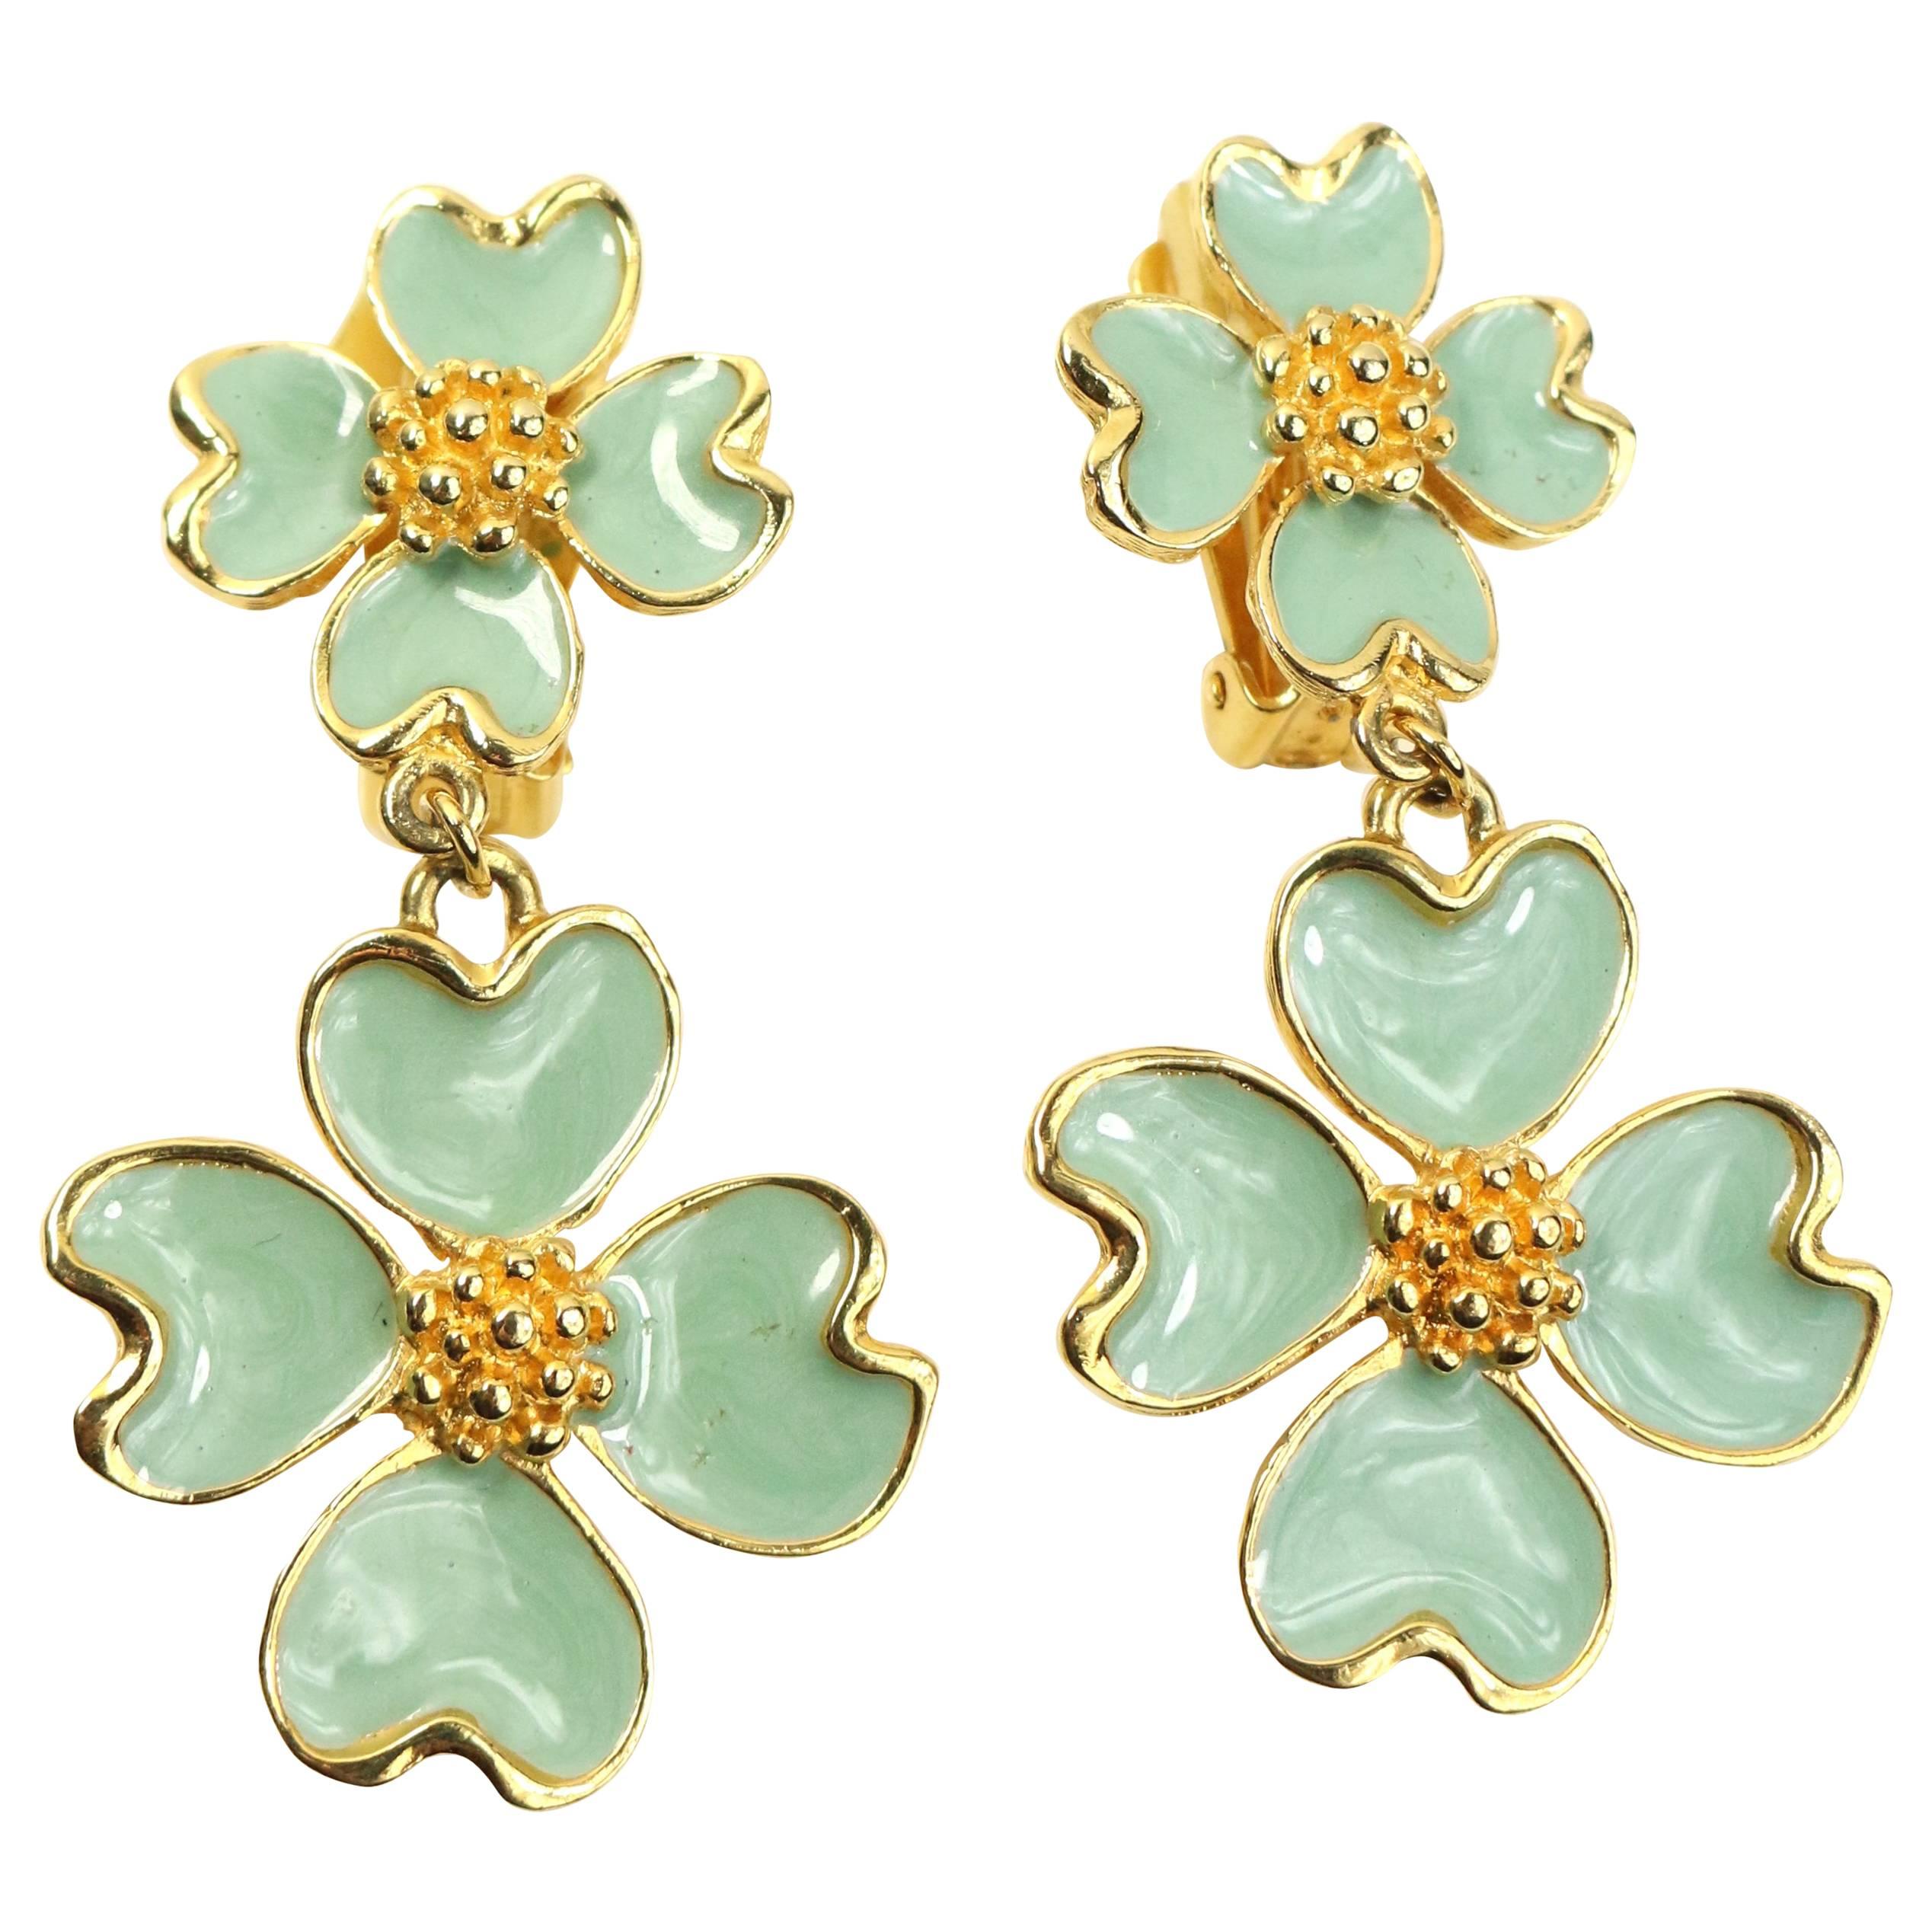 Christian Lacroix Gold Toned Green Clovers Clip On Earrings